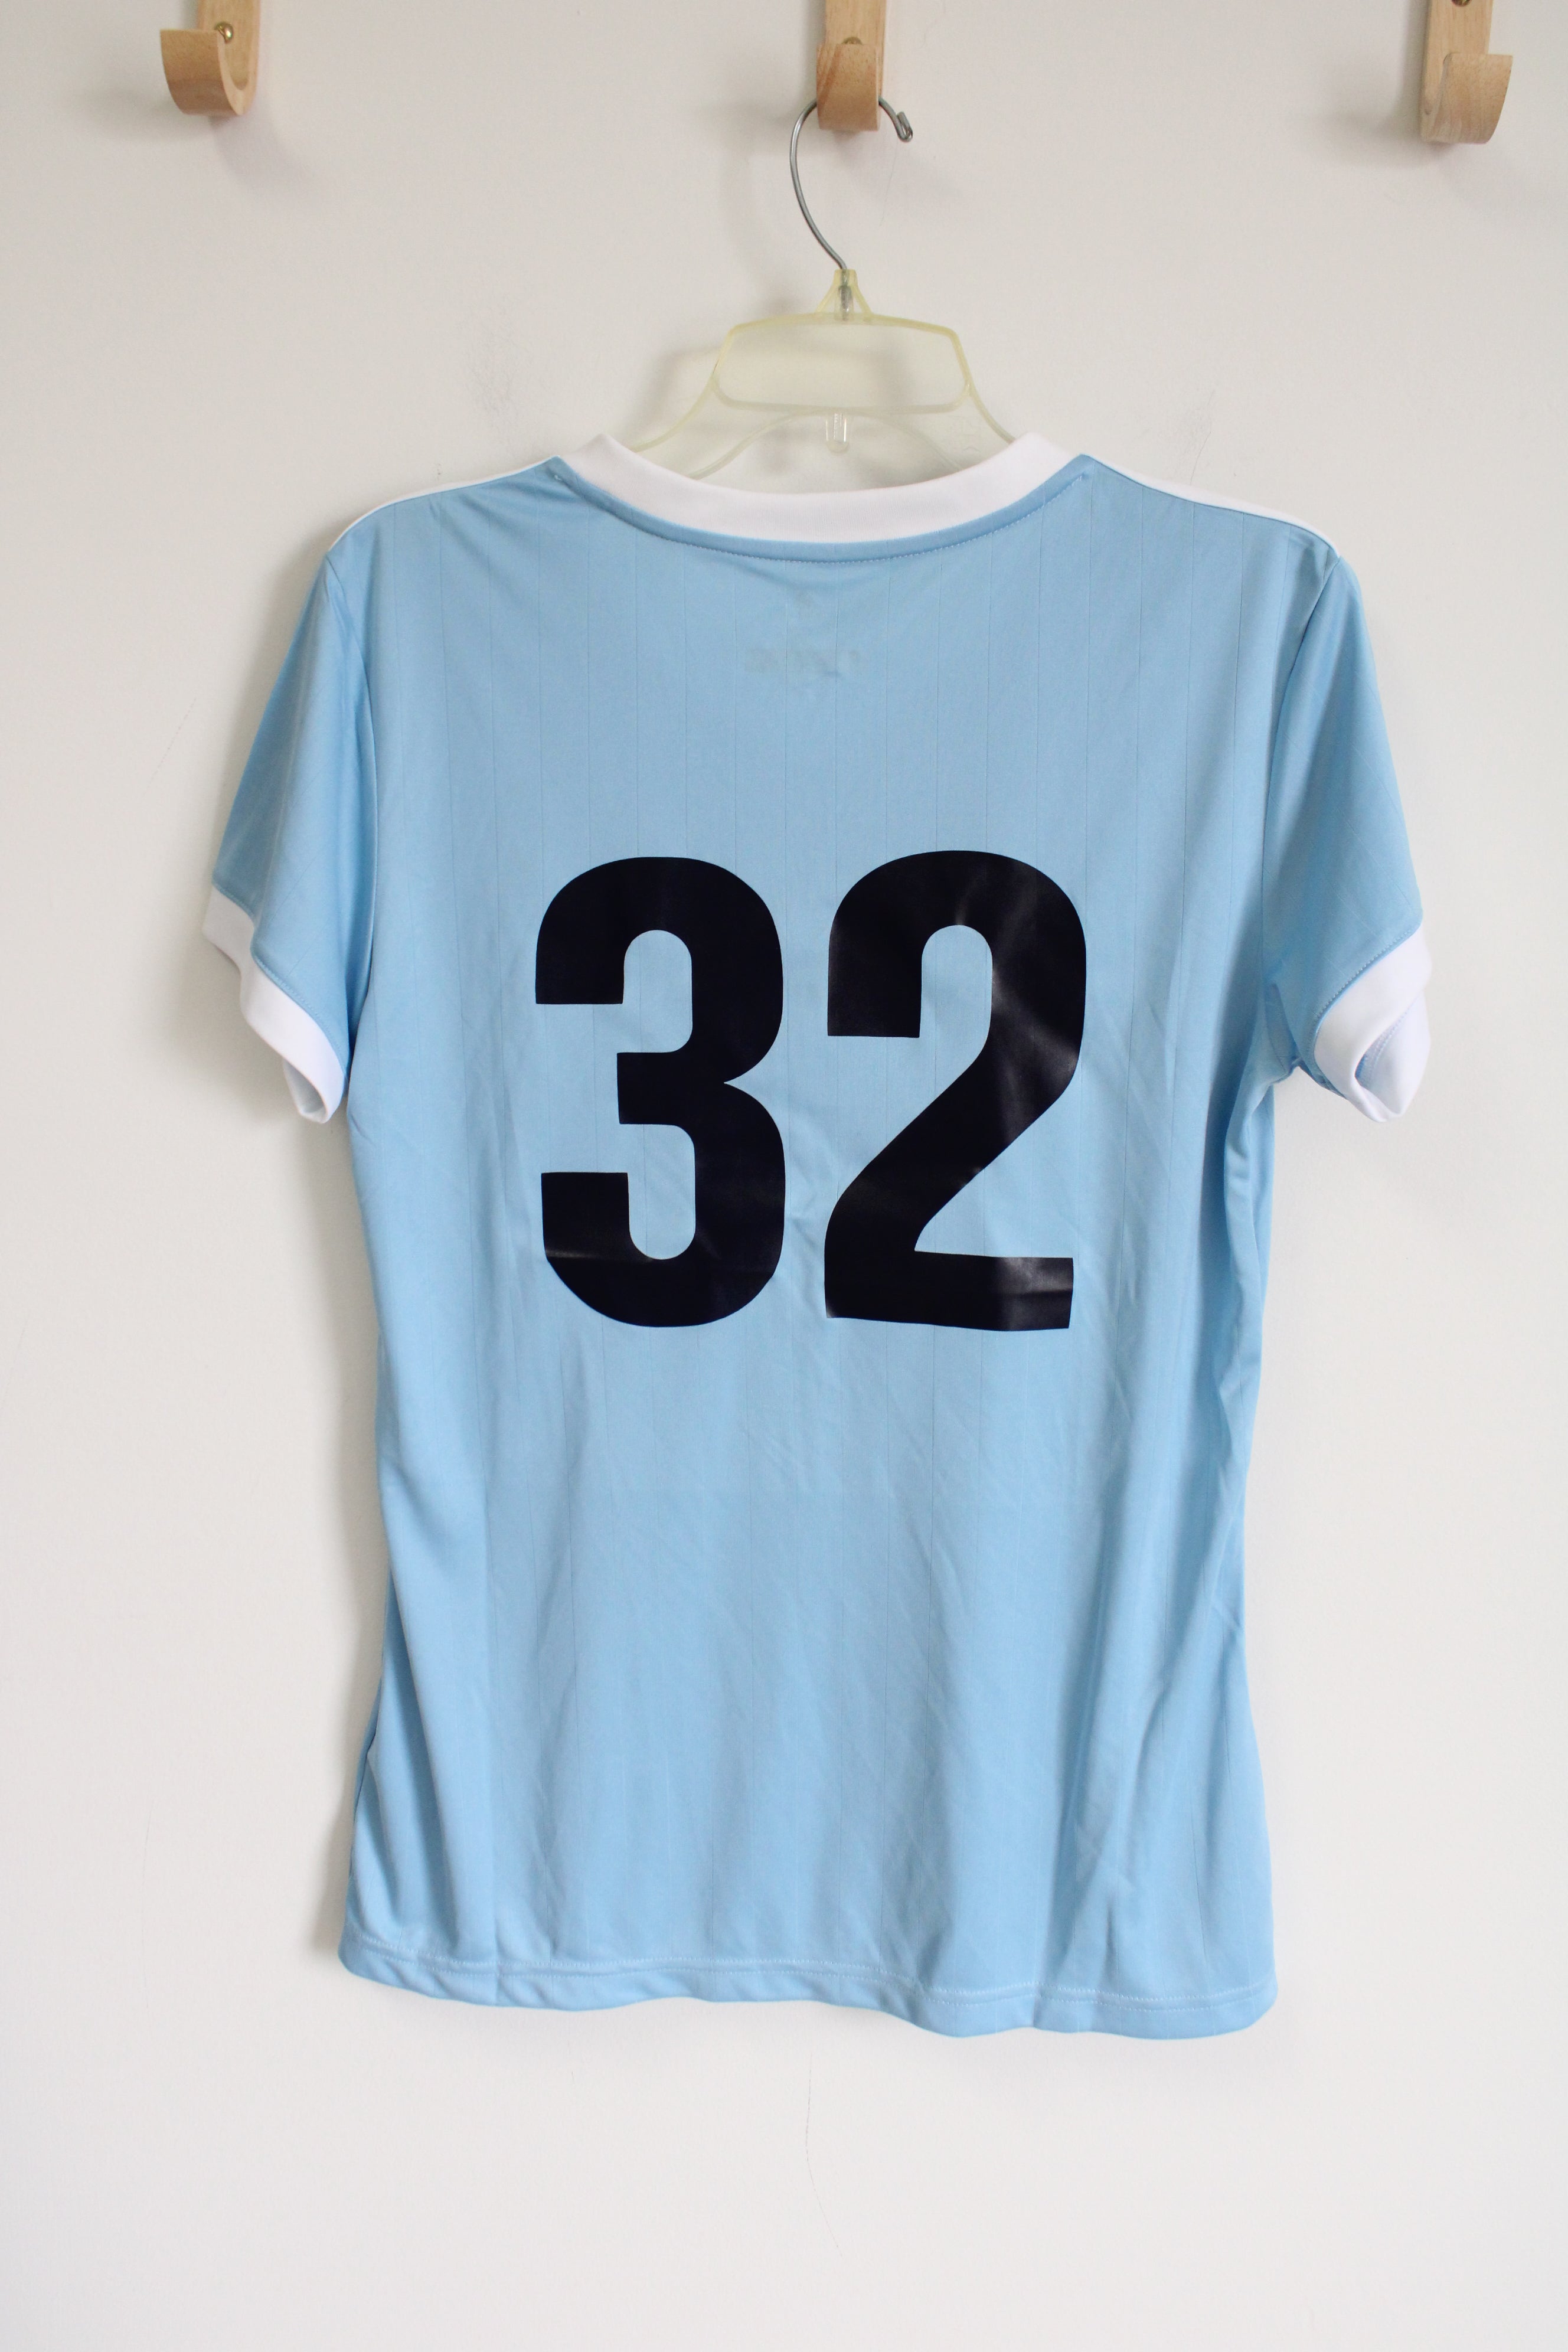 NEW Adidas Climalite Iron Valley United Soccer #32 Shirt | M